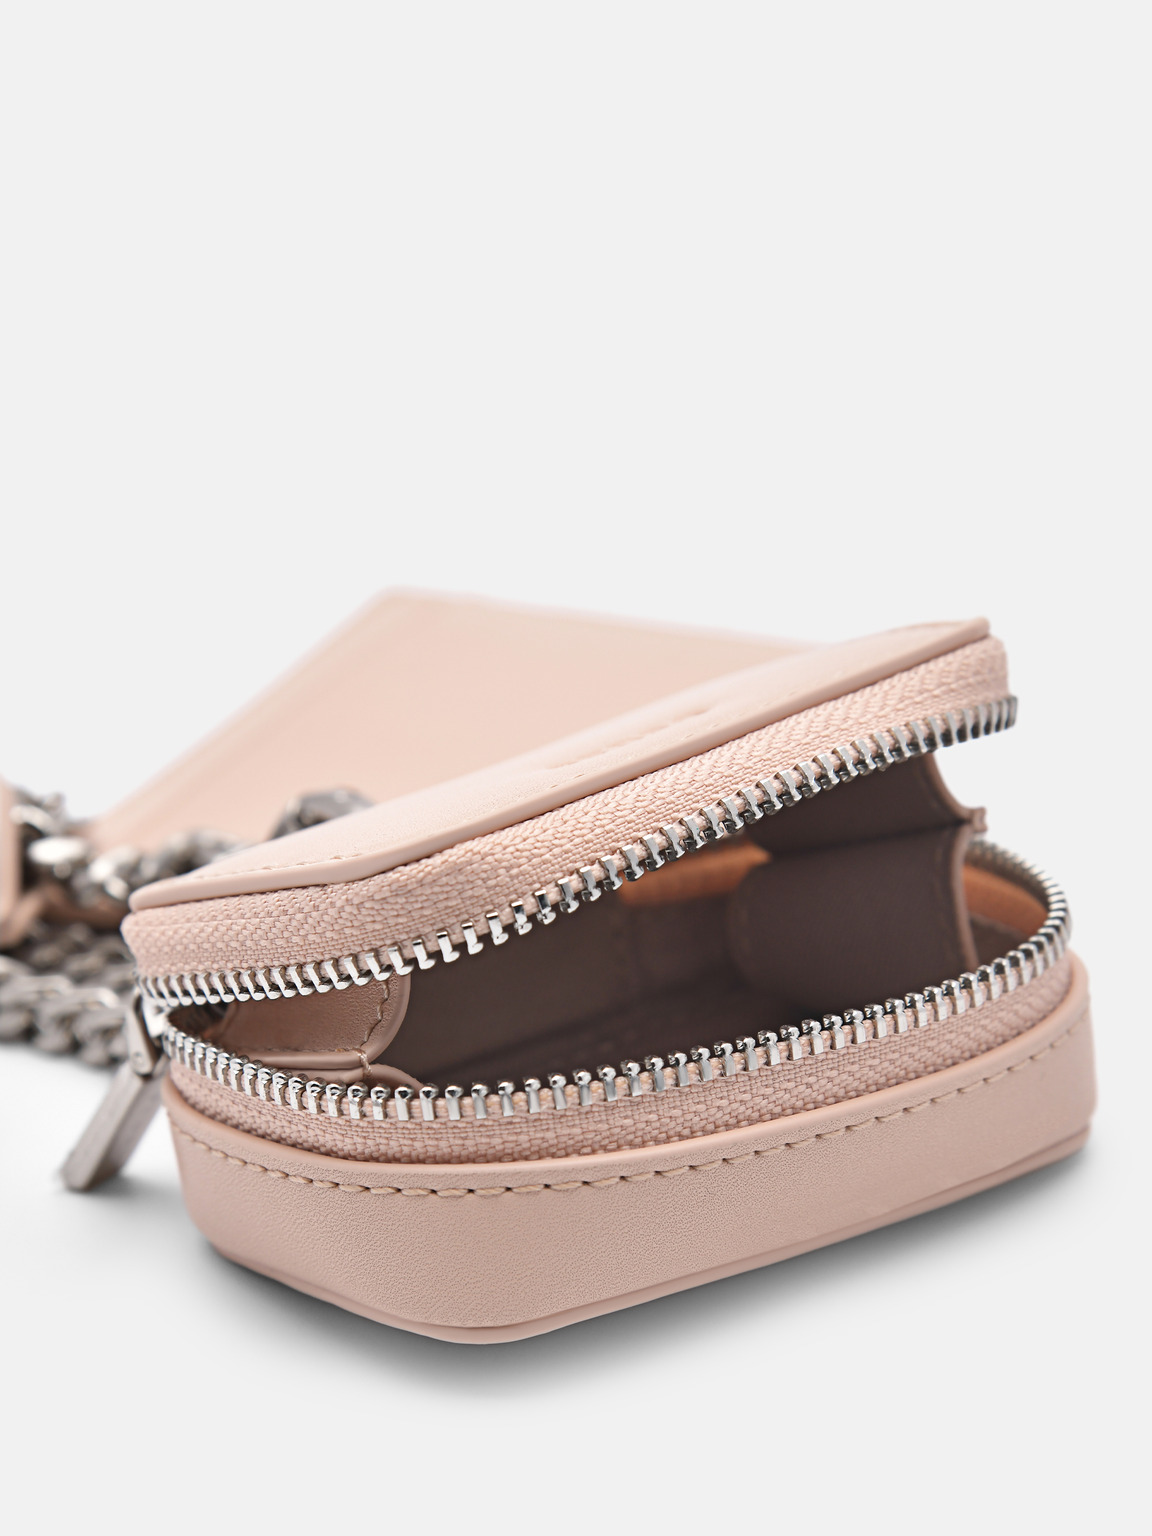 Leather Lanyard with Card Holder, Nude